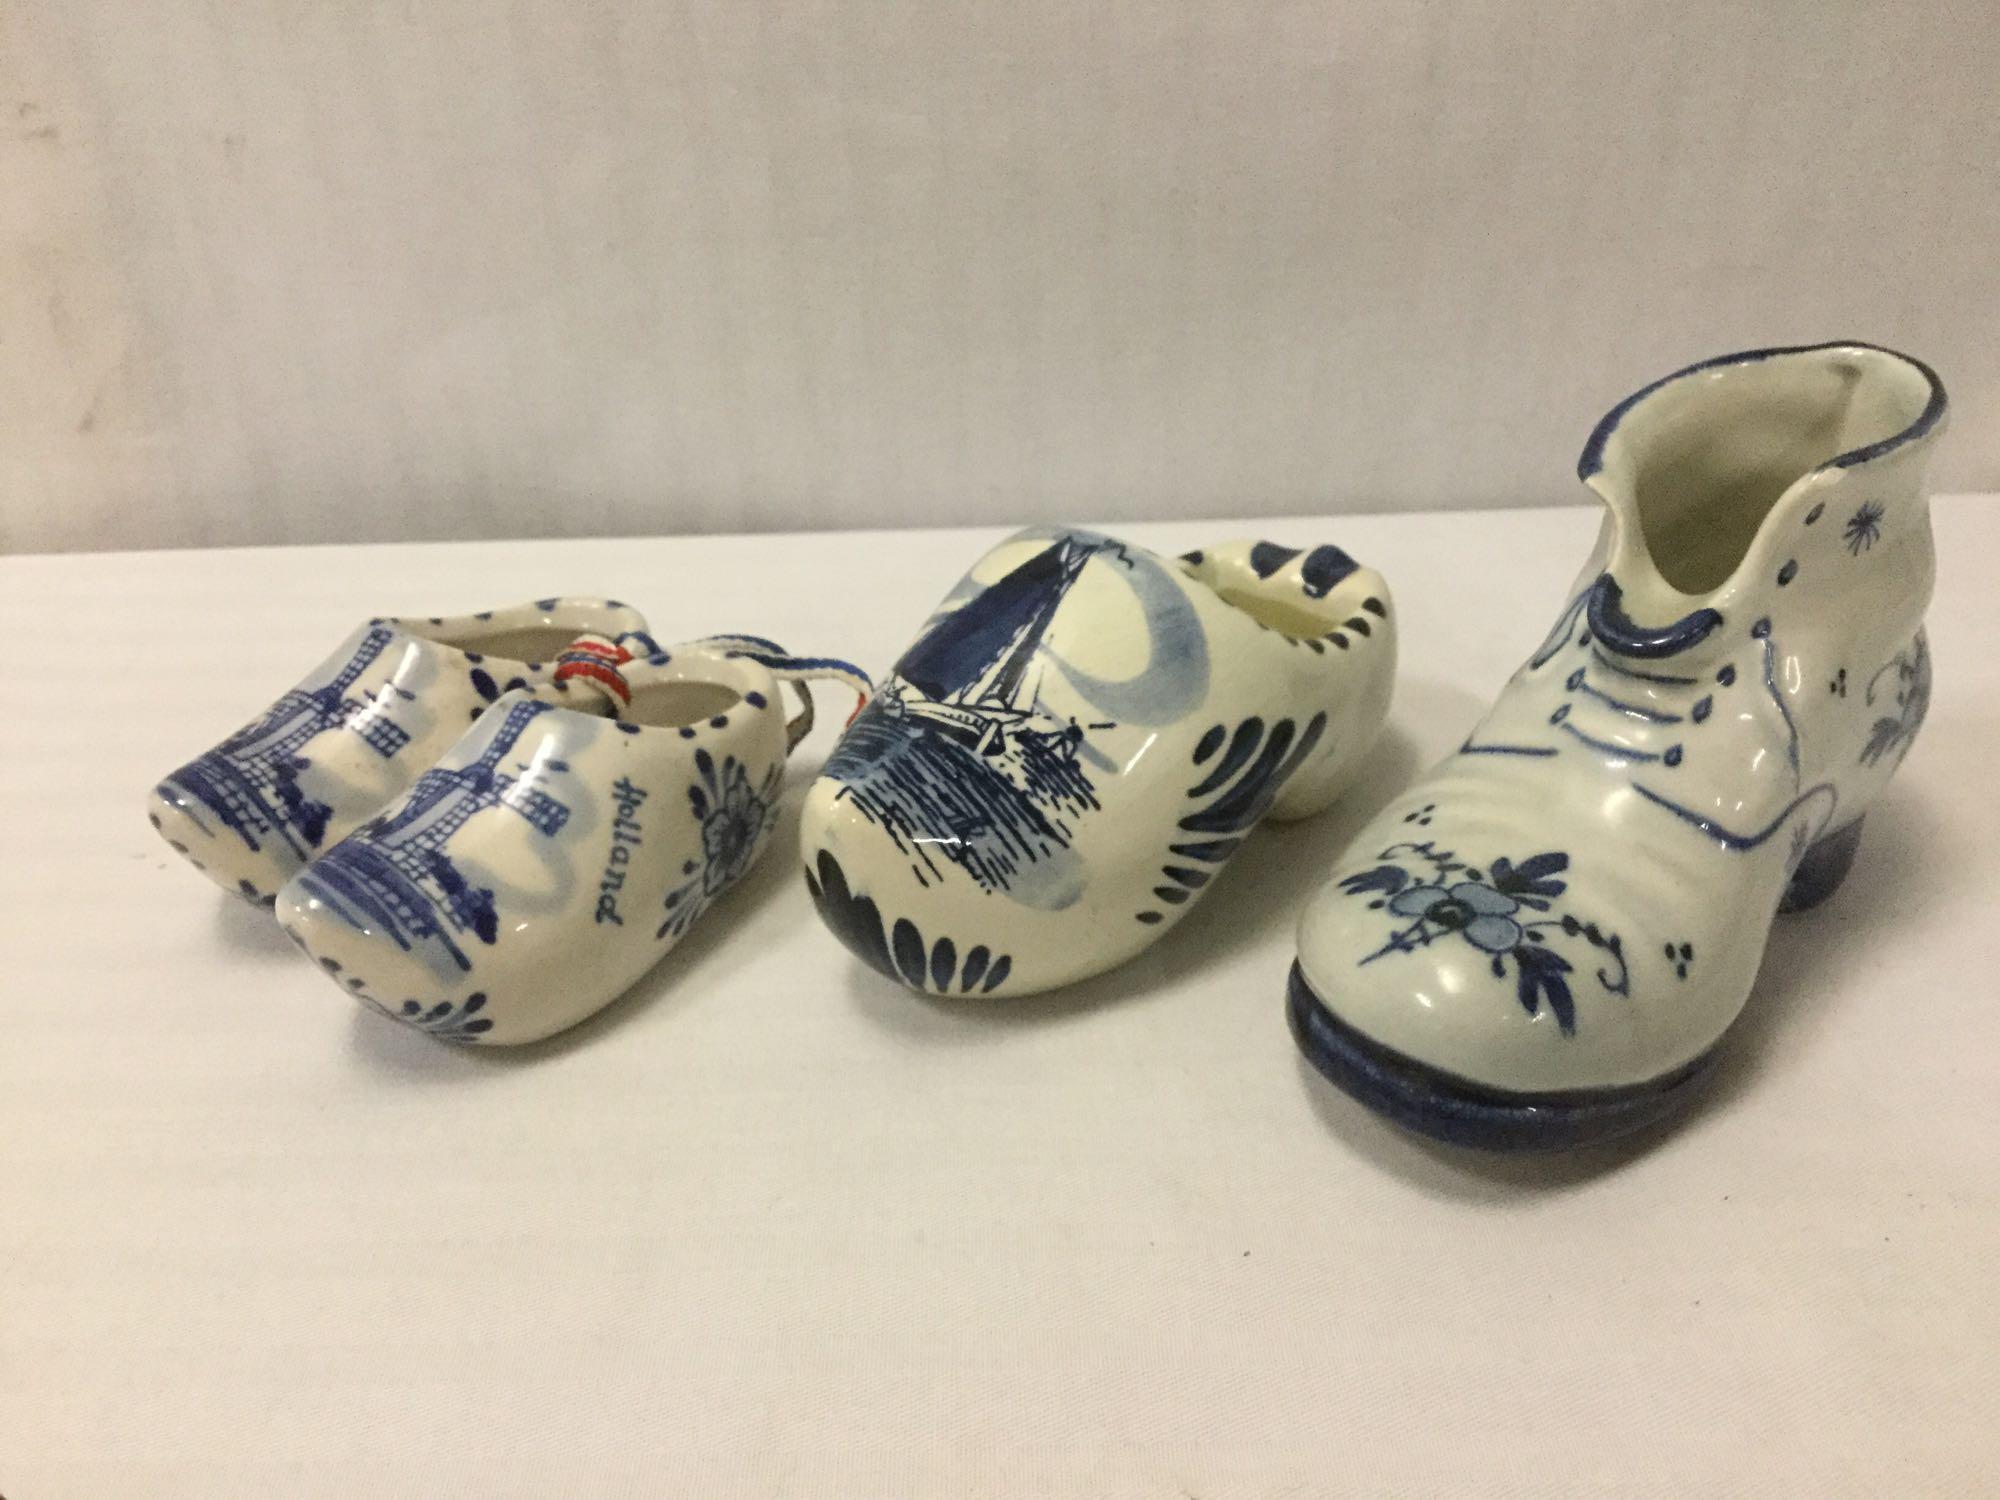 35 vintage hand-painted Dutch Delft Blue China clogs & 1 boot, many are matching pairs.